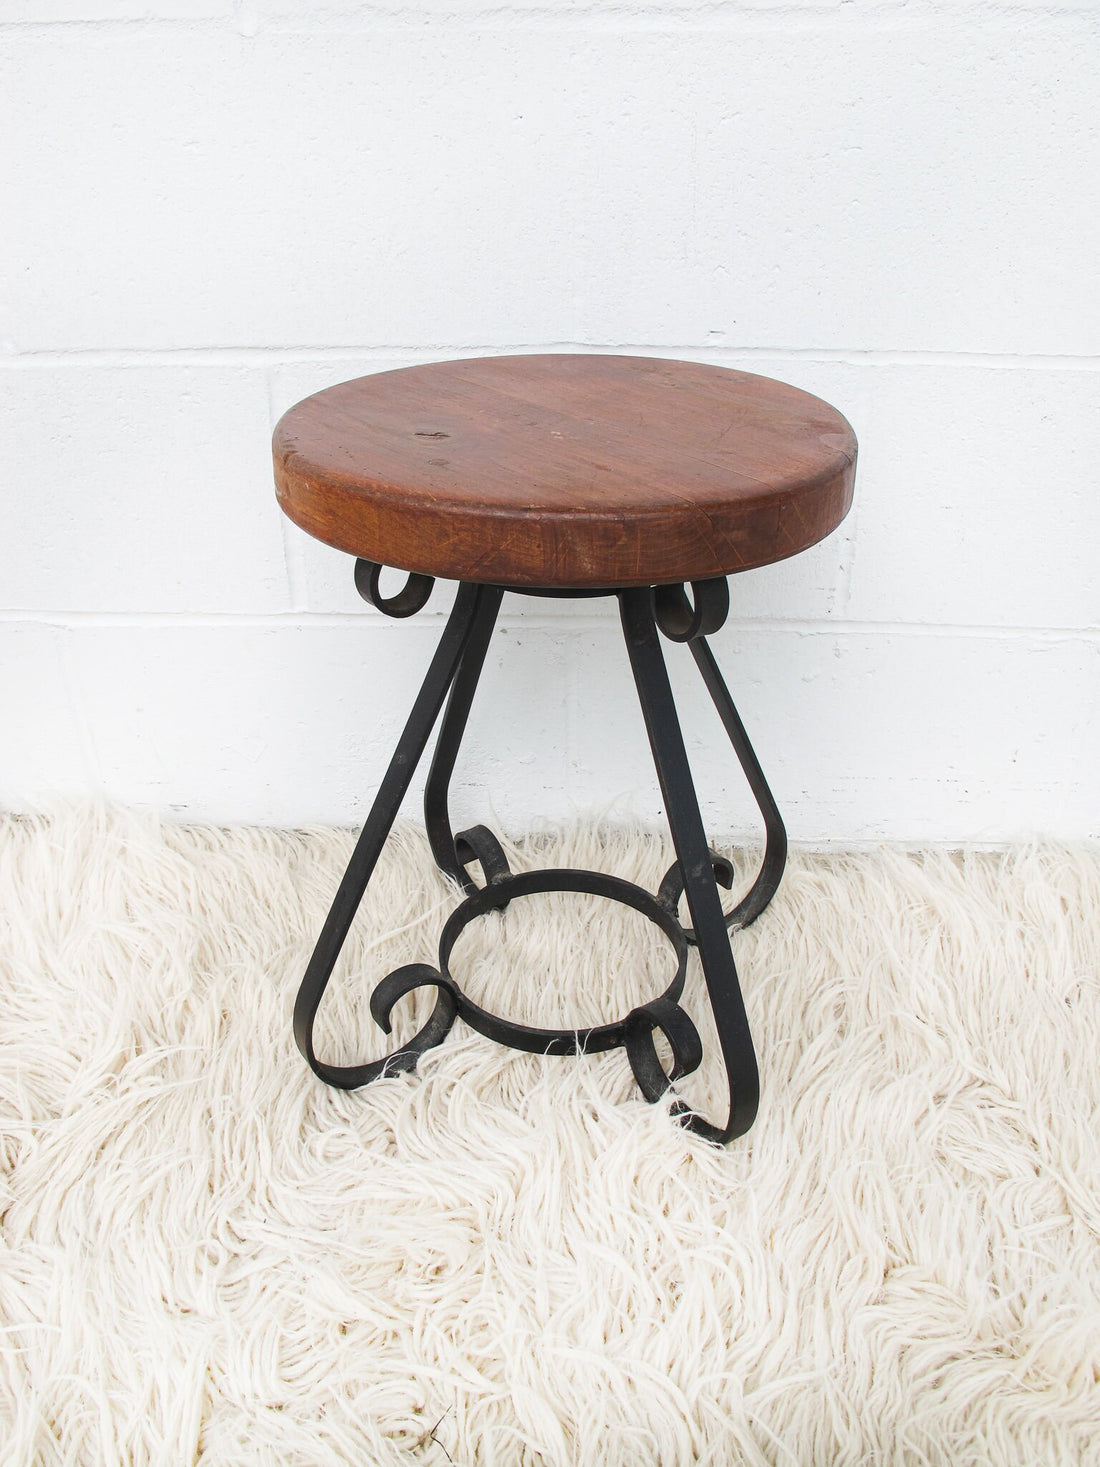 Cast Iron and Wood End Table Stool Plant Stand